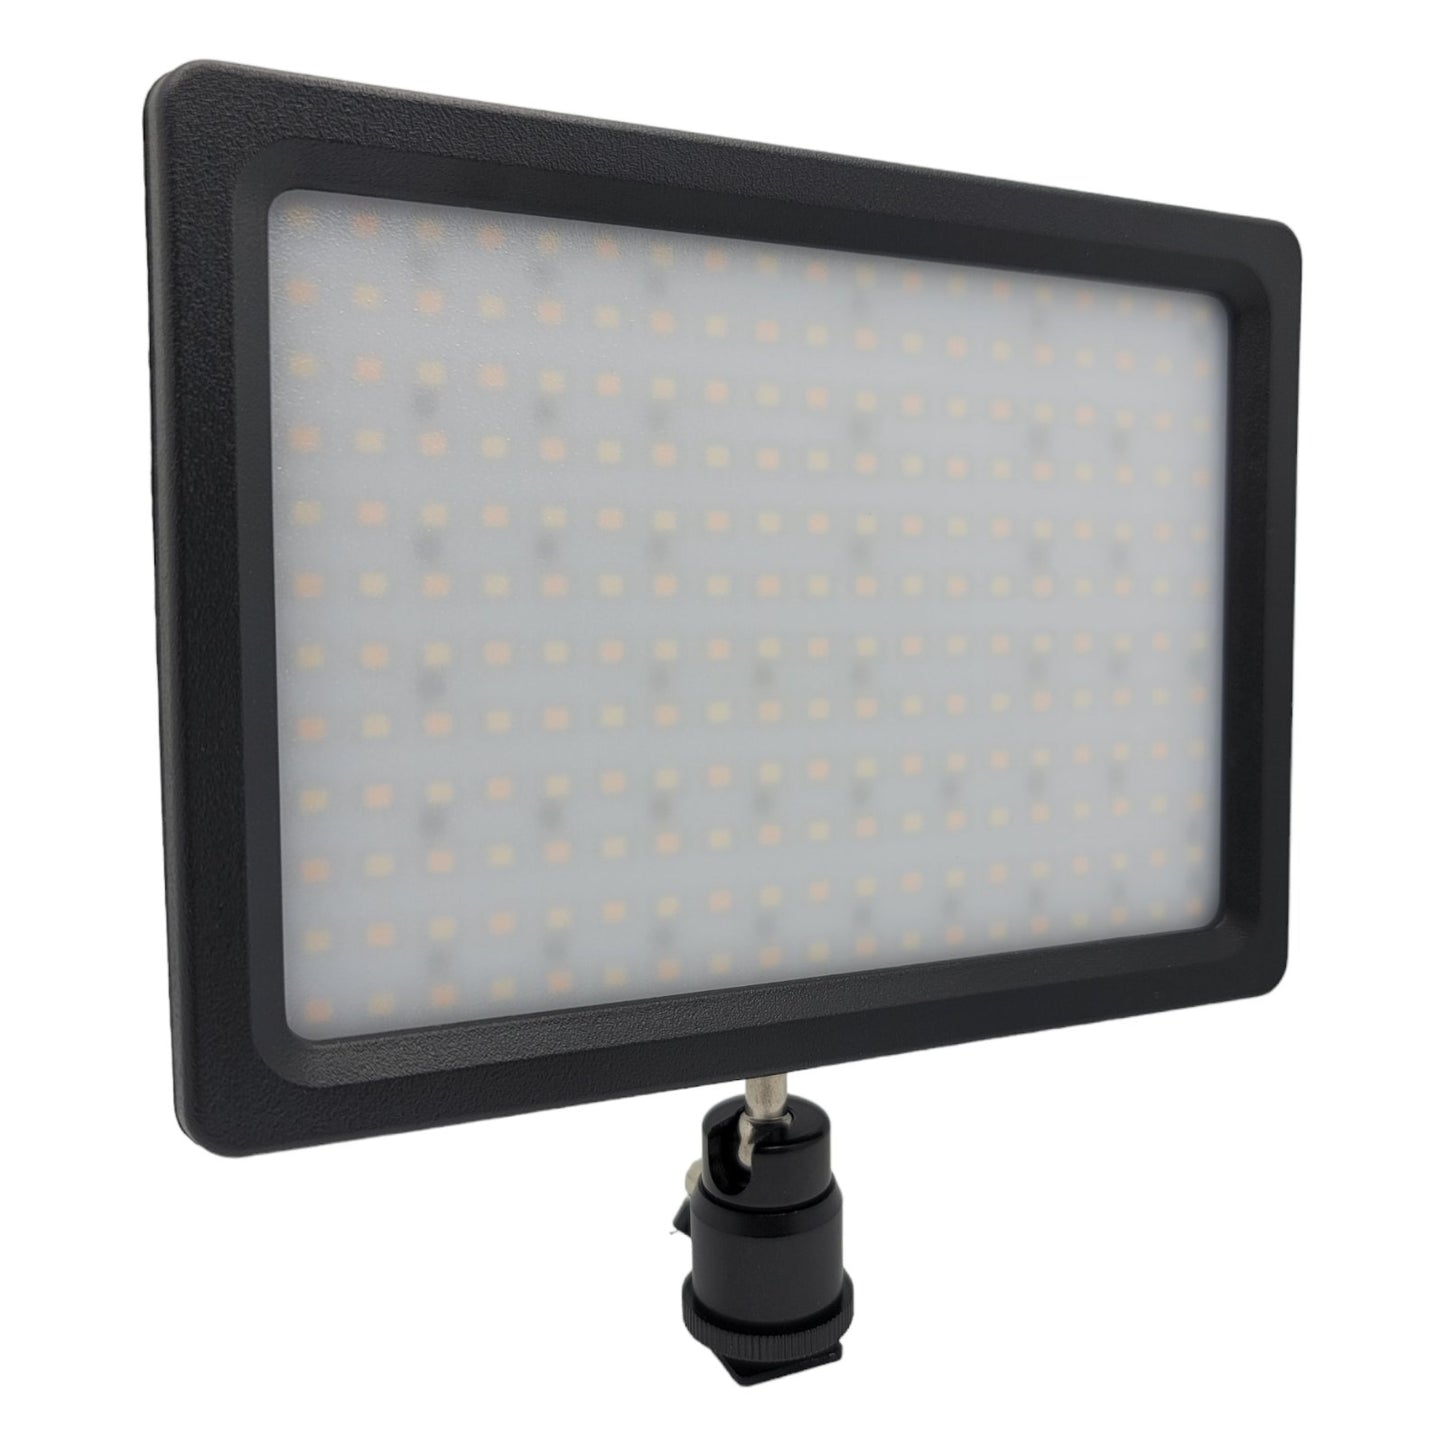 Hridz 112LED Bi colour Video Light with battery pack and 190cm stand